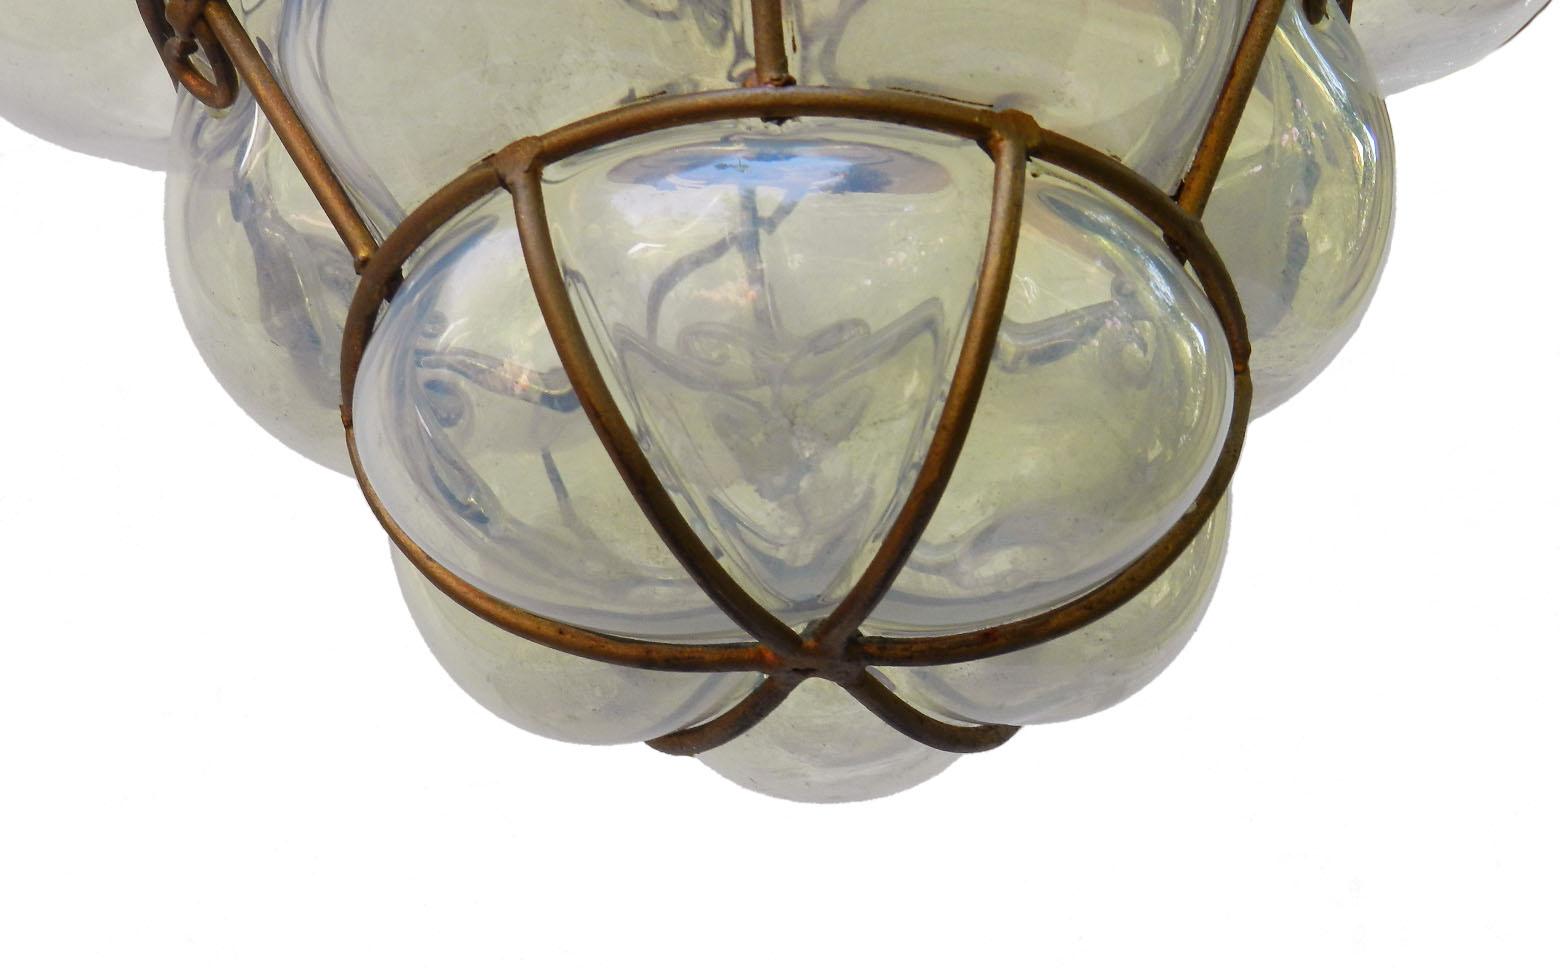 Seguso Murano pendant light Italian vintage handblown opalescent bubble glass midcentury
Manufactured by Seguso in the 1960s.
It is made from handblown opalescent colored glass with a bronzed metal cage.
Sometimes known as Ali Baba lights
The